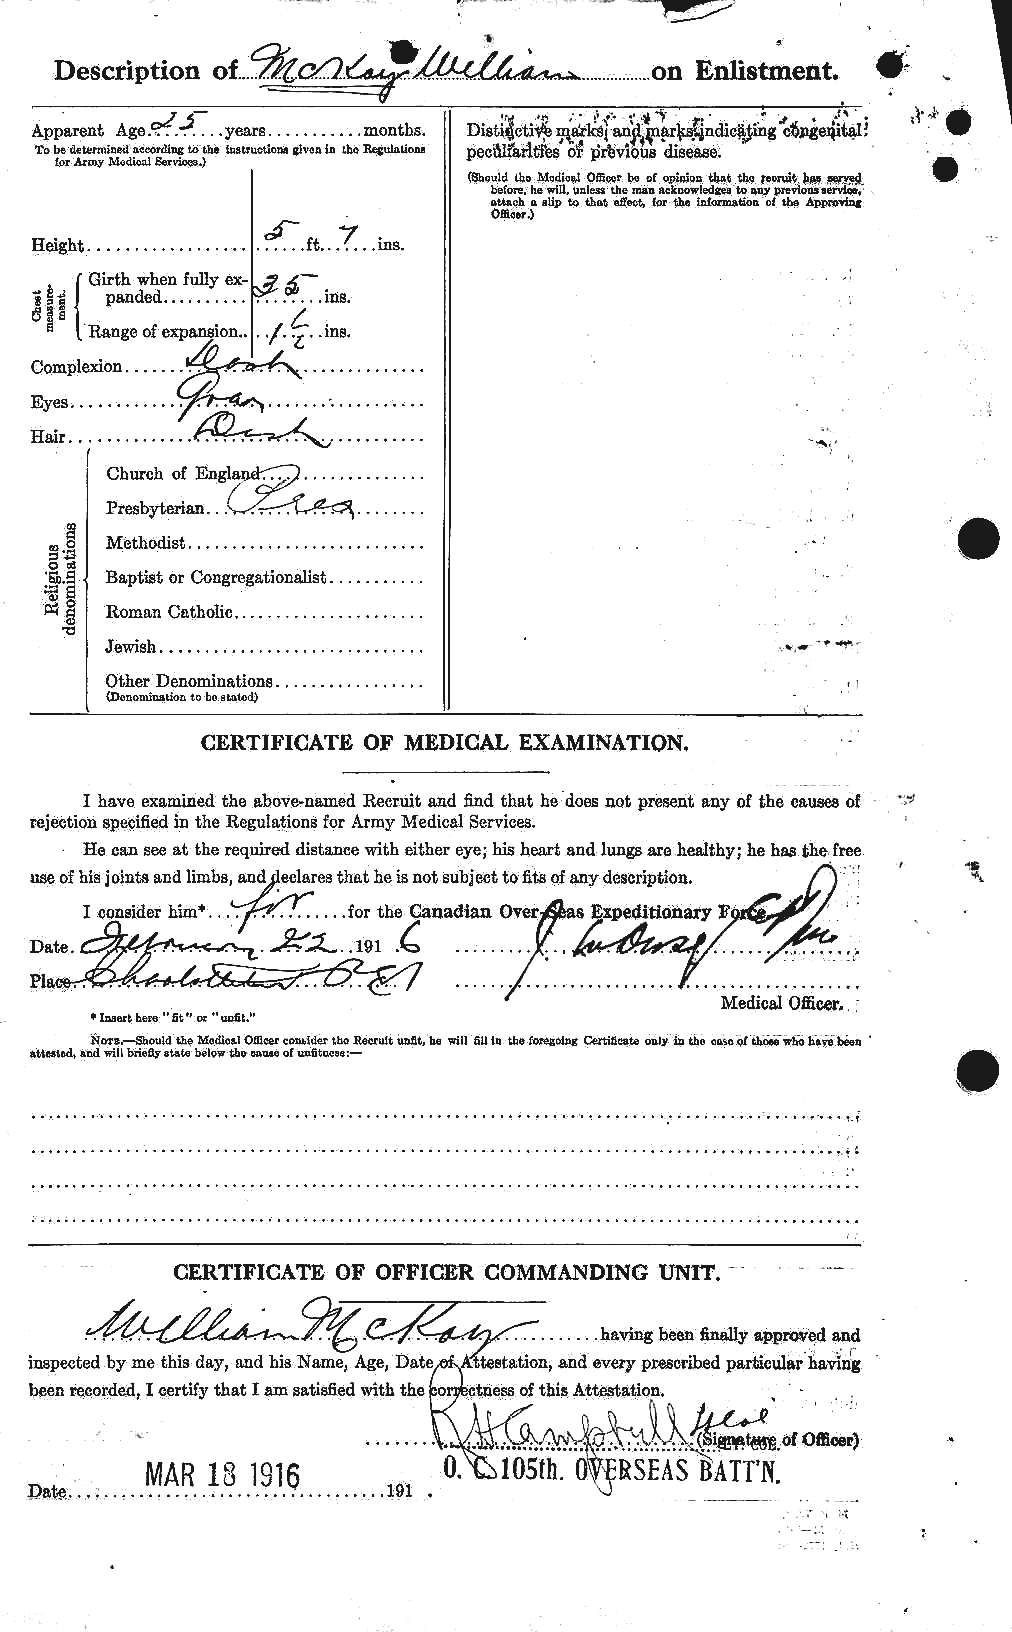 Personnel Records of the First World War - CEF 530256b